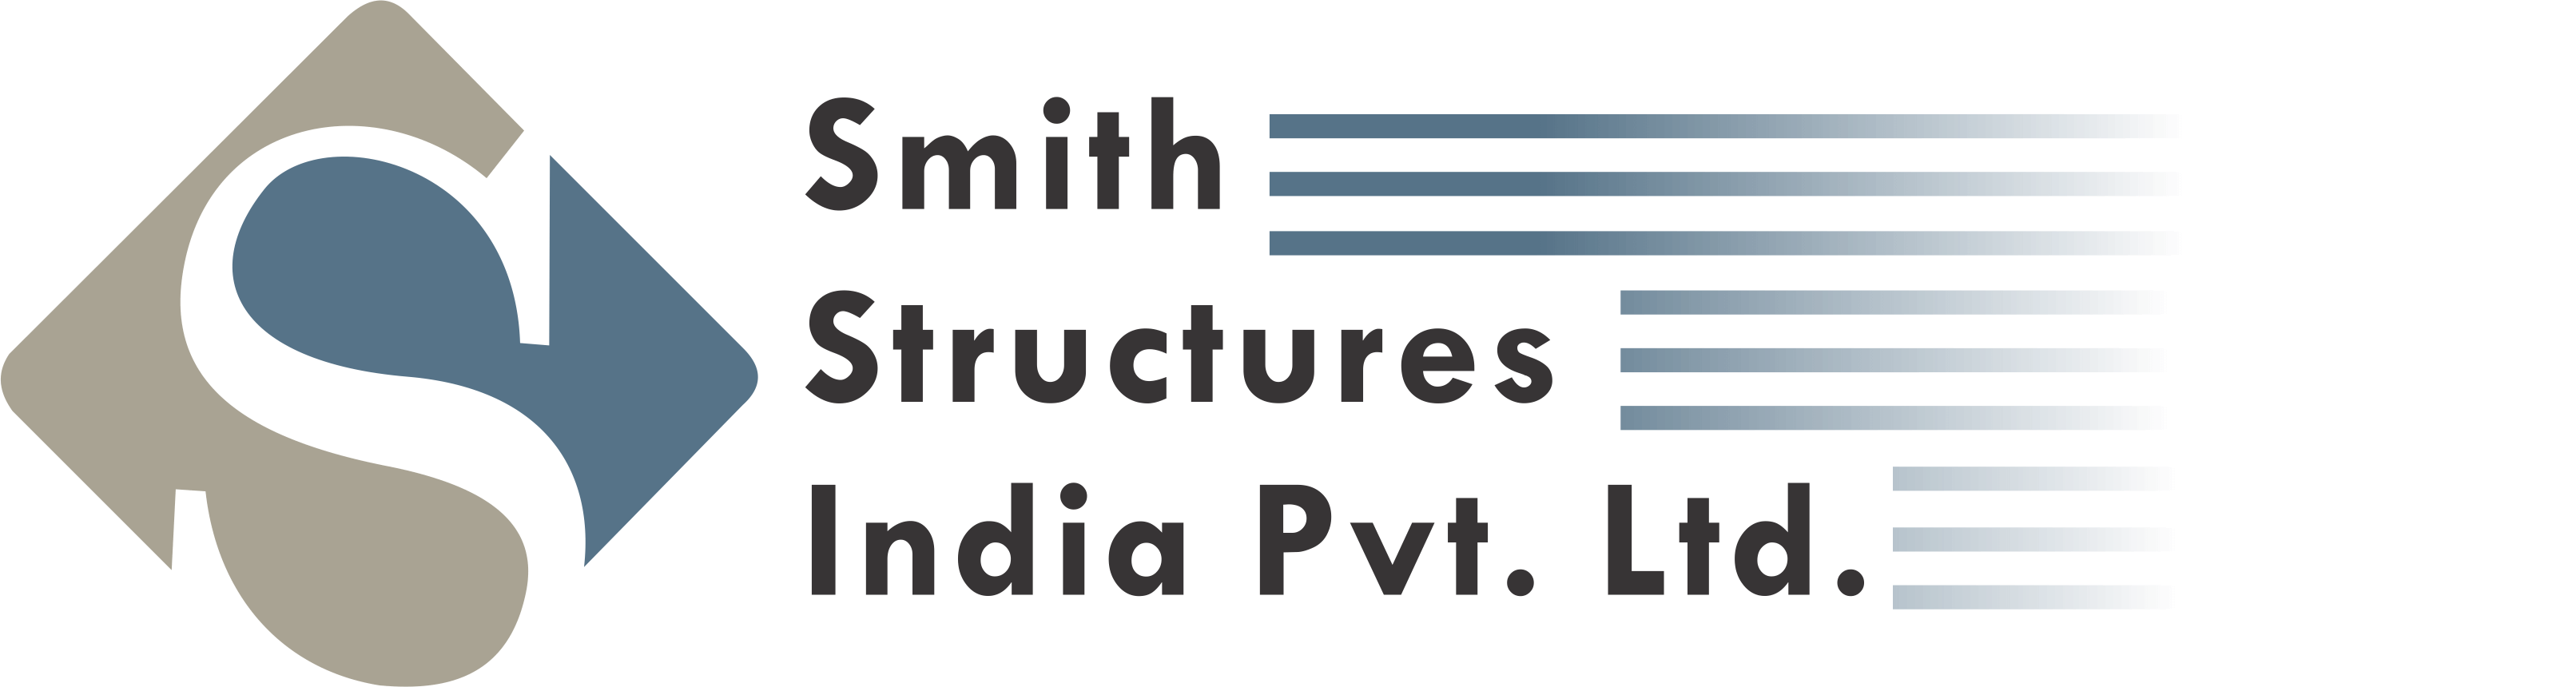 Design and Engineering | Smith Structures